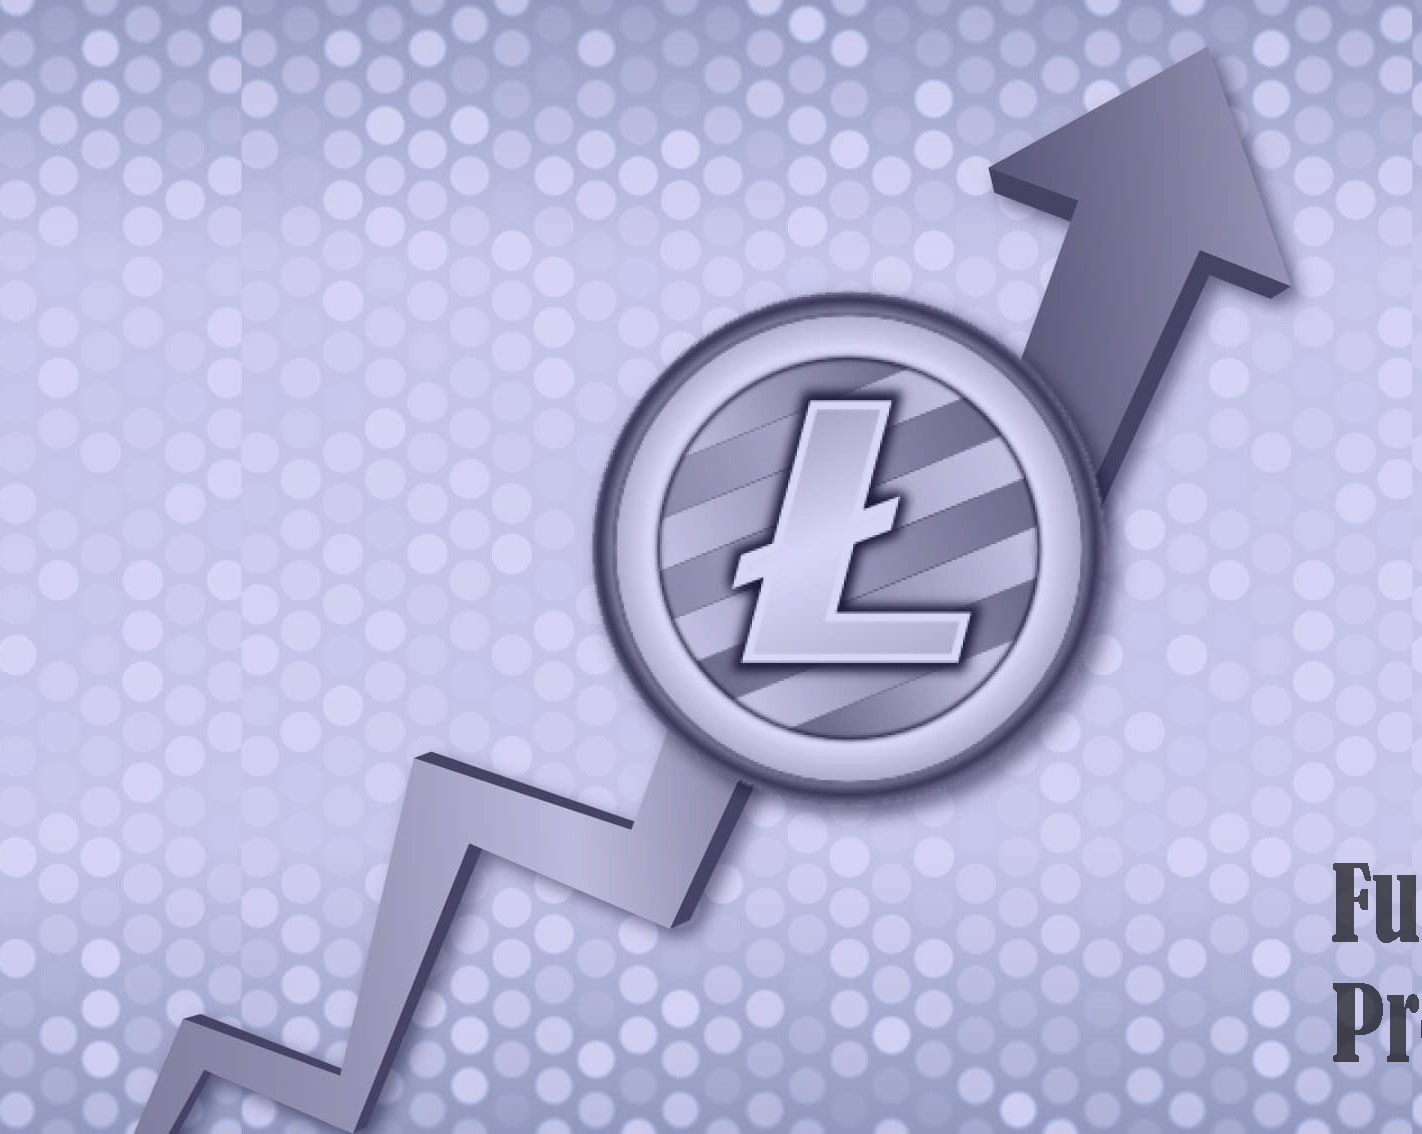 What happens when you sell litecoin фильм про биткоин 2021